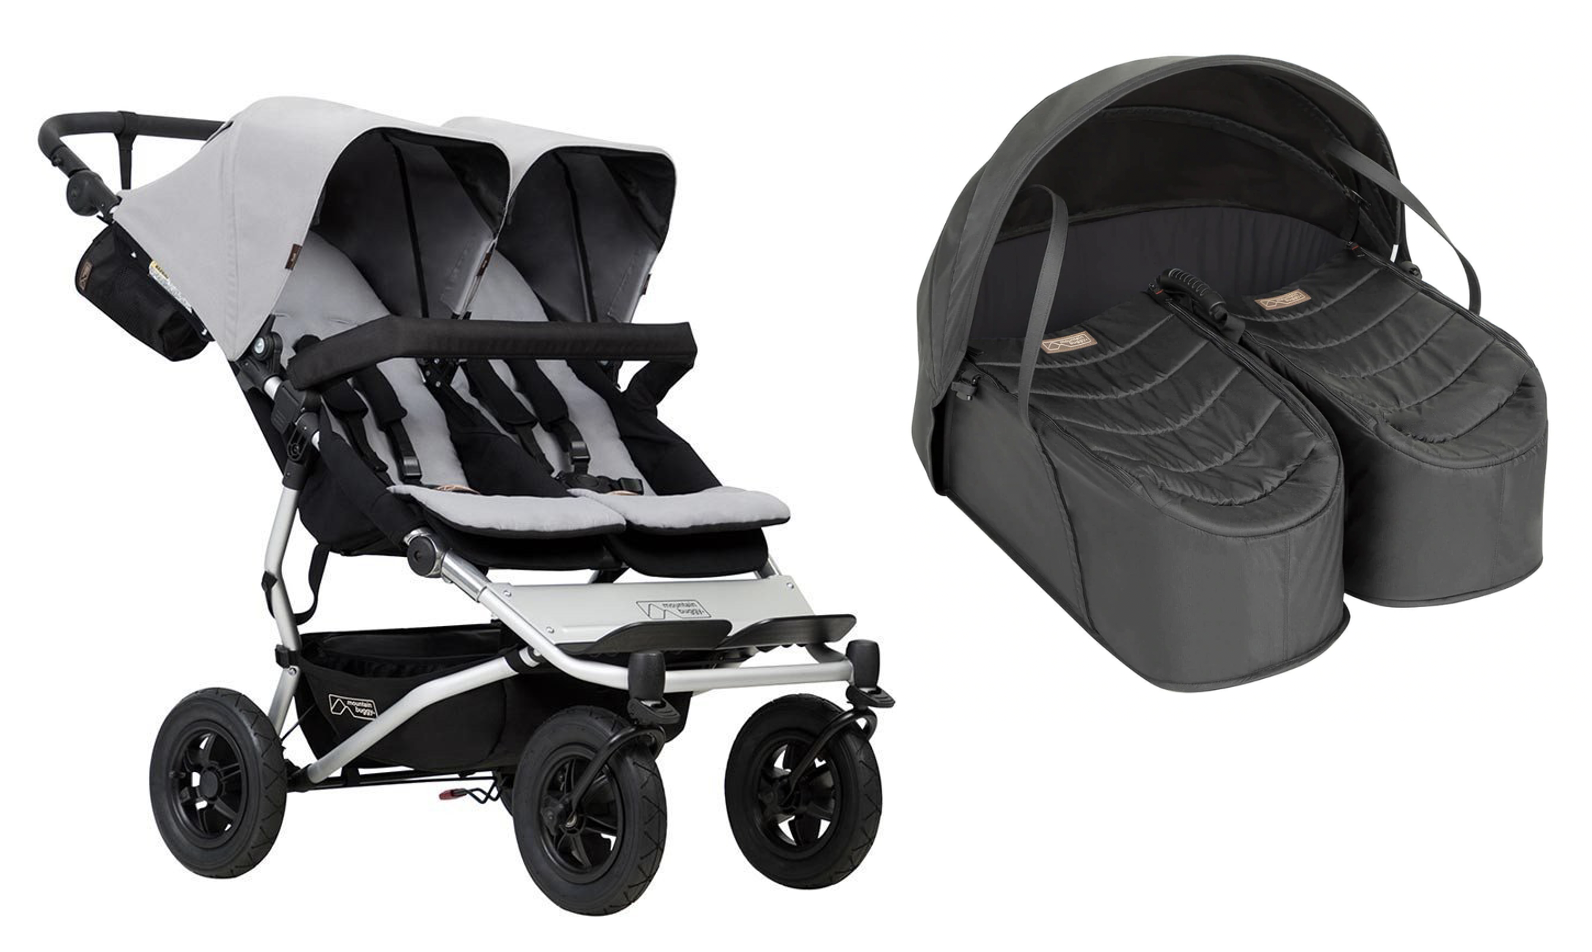 Mountain Buggy Duet in Silver with Black Cocoon For Twins